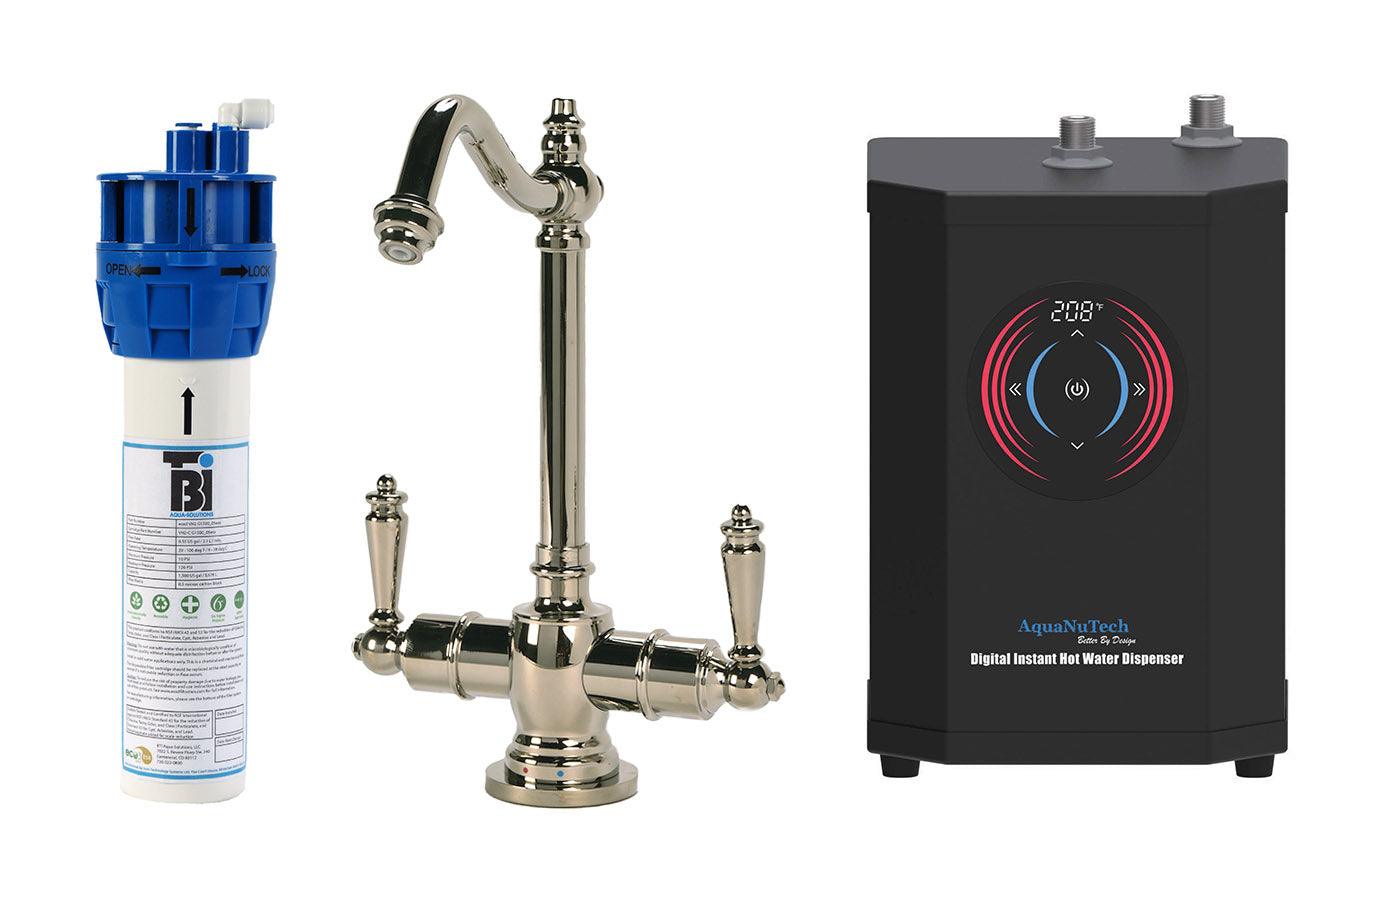 Filtration/Hot Water Combo - Traditional Hook Spout Faucet With Digital Instant Hot Water Dispenser and Filtration System. Polished nickel